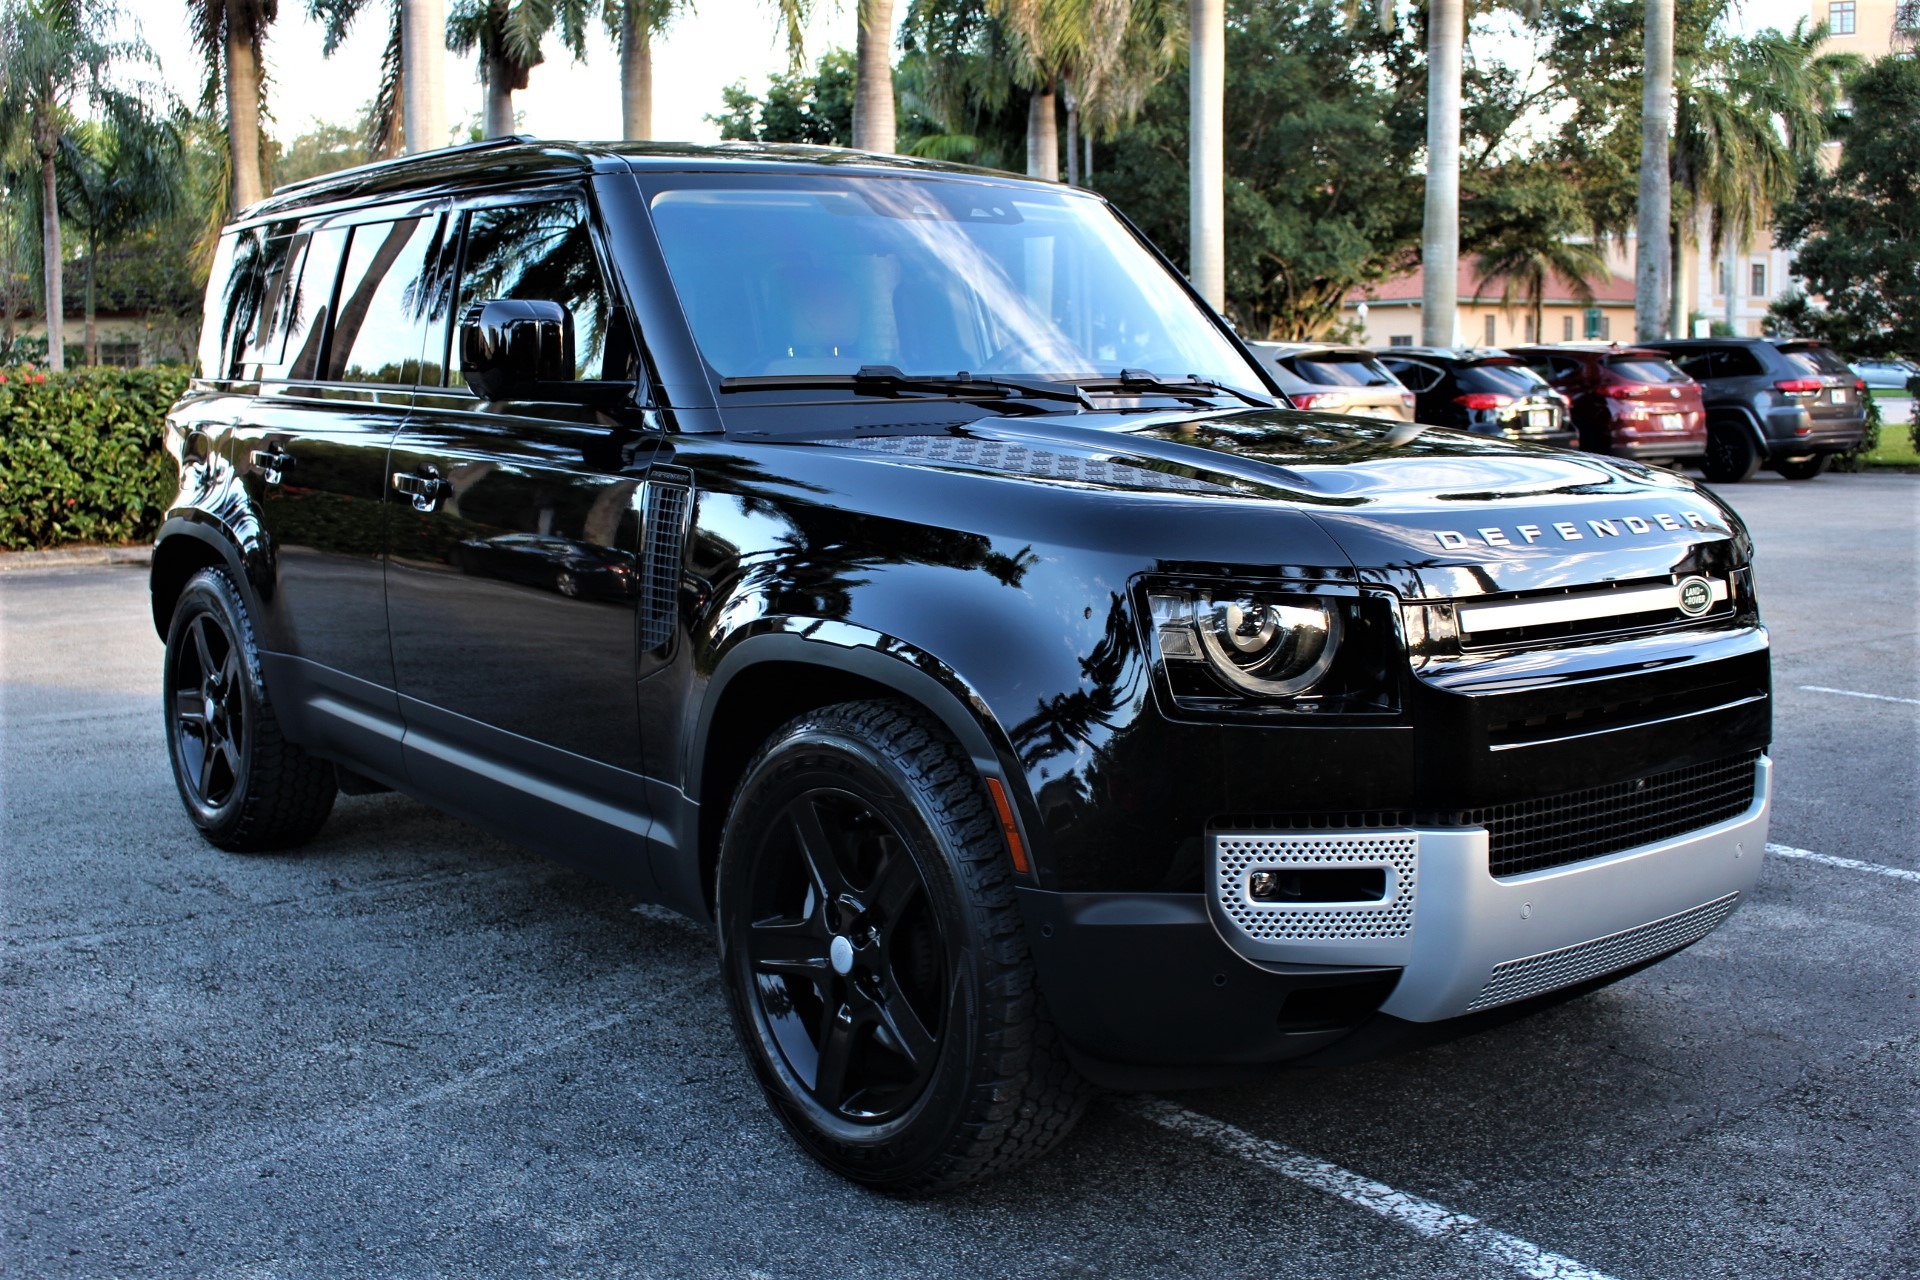 Used 2020 Land Rover Defender 110 First Edition for sale Sold at The Gables Sports Cars in Miami FL 33146 2